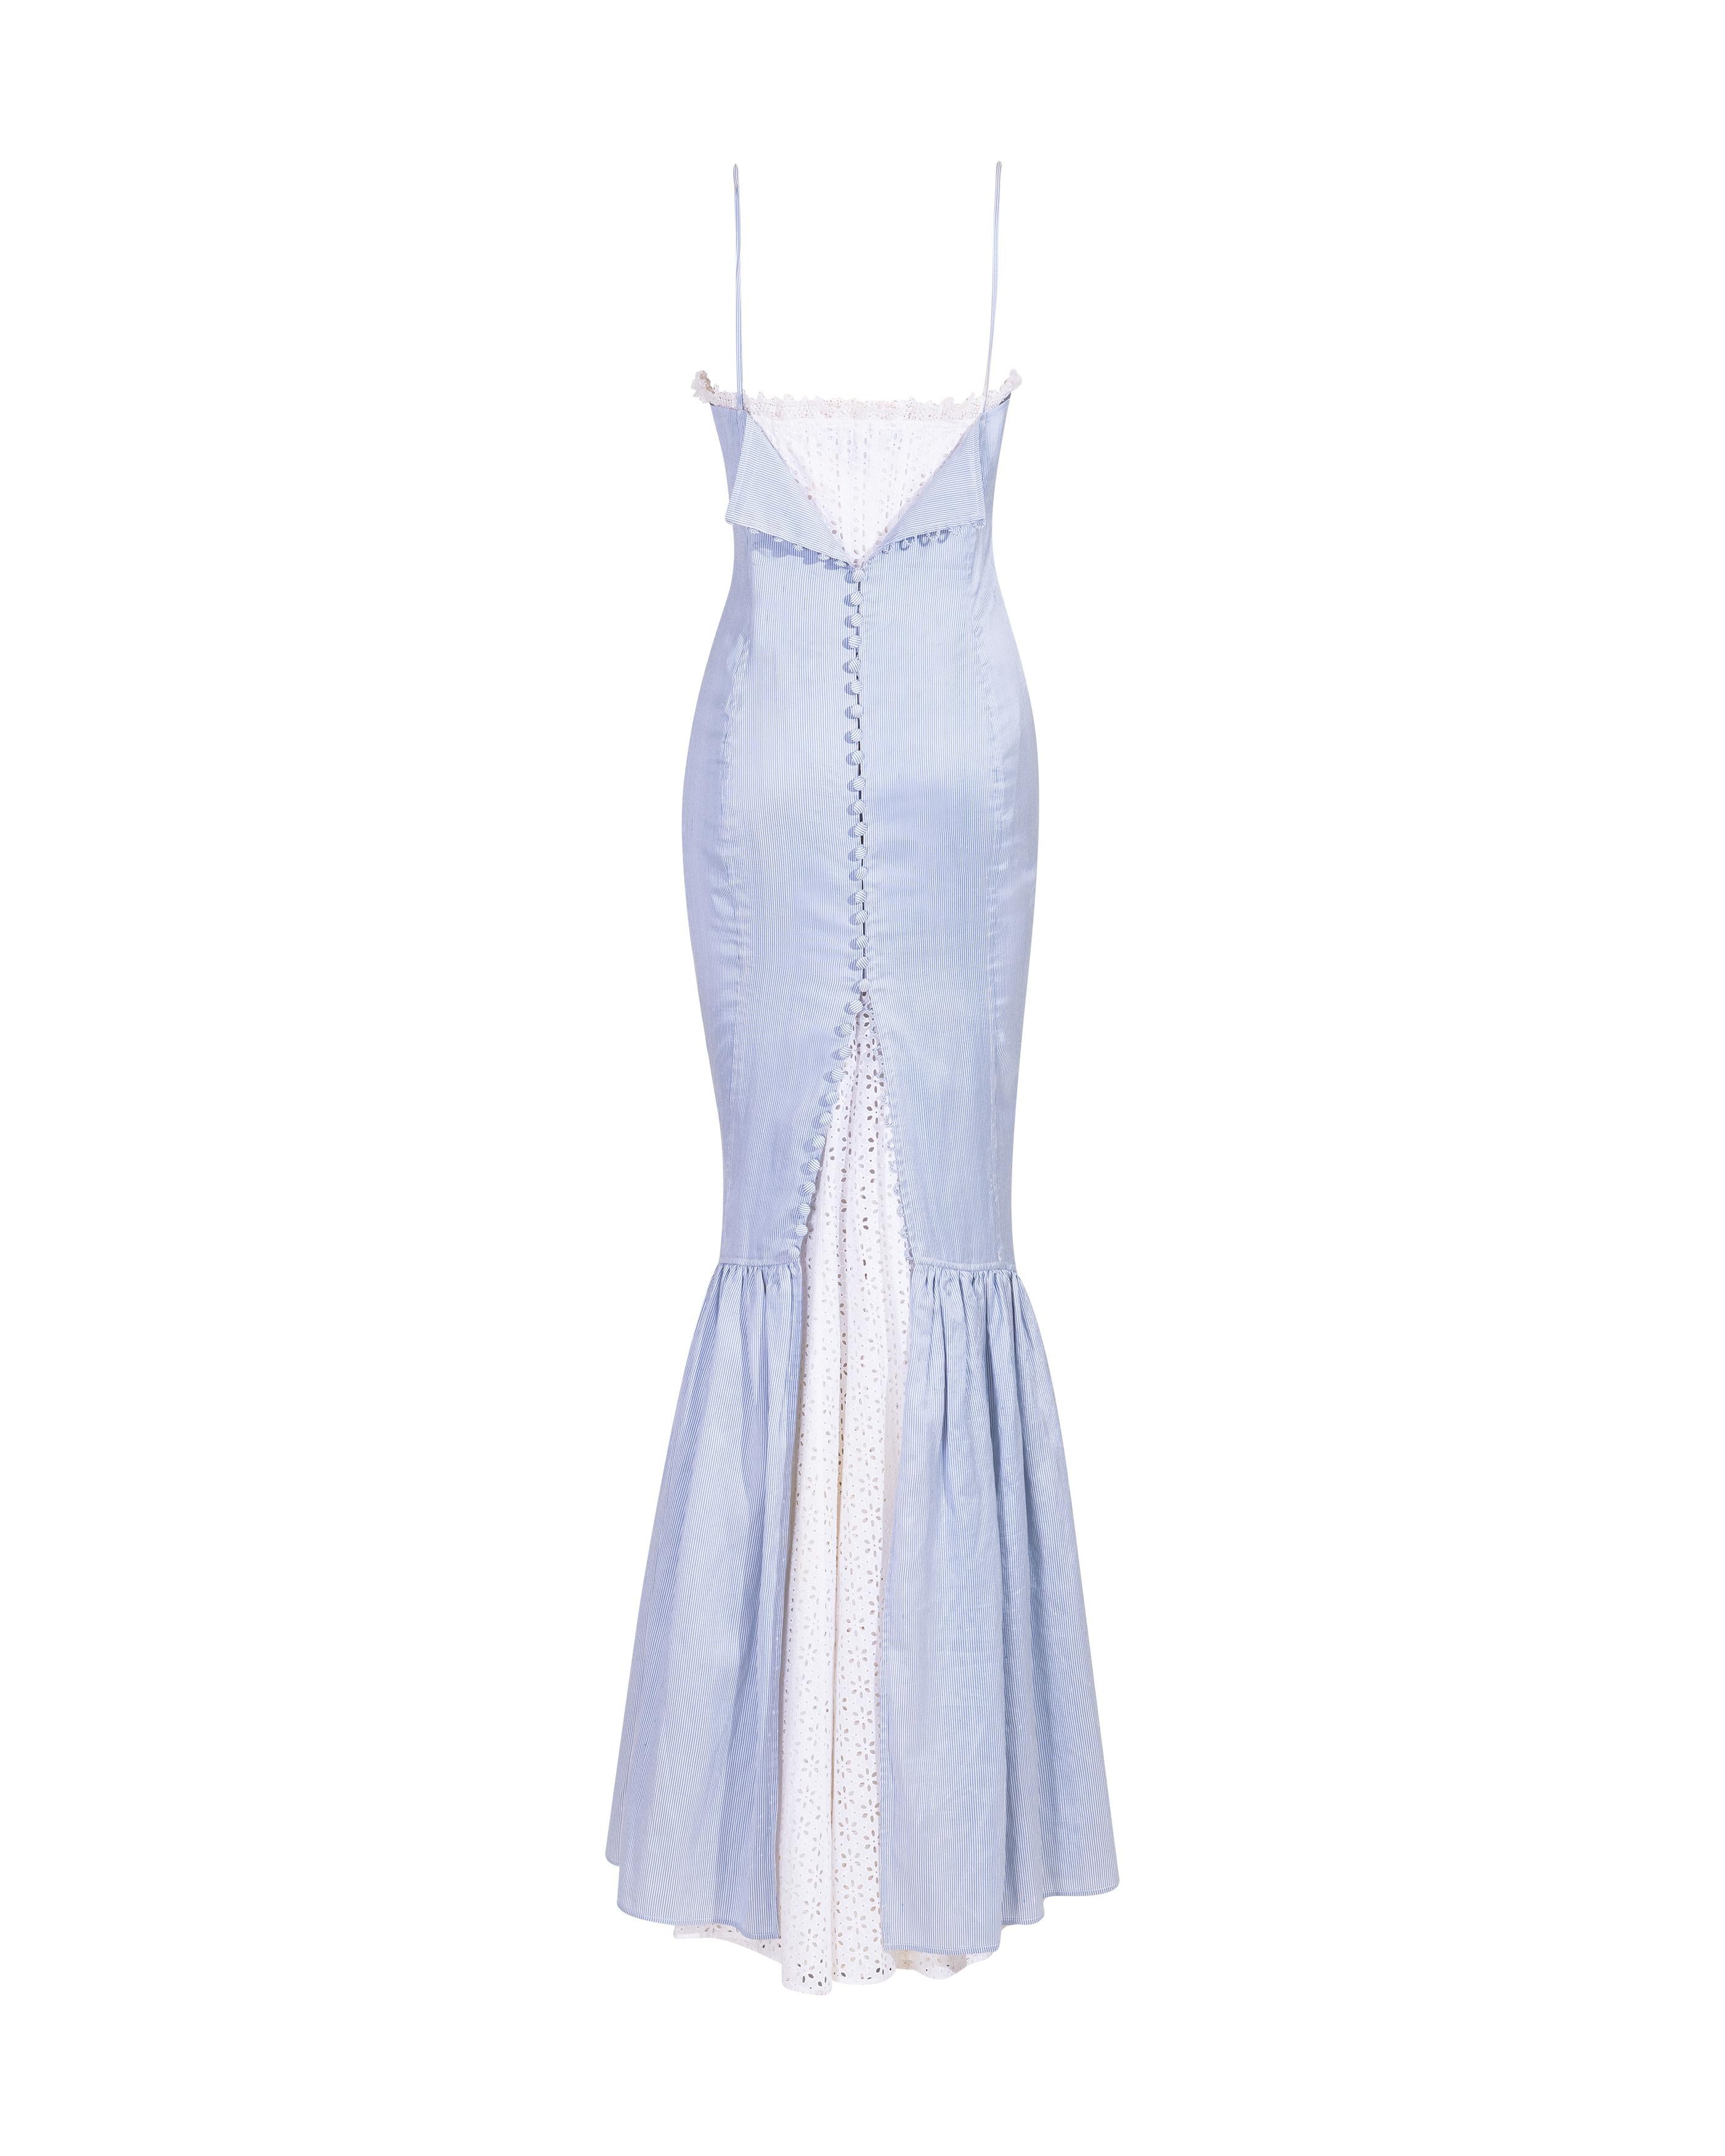 S/S 2006 Ralph Lauren Pinstriped Blue and White Lace Trim Gown 1